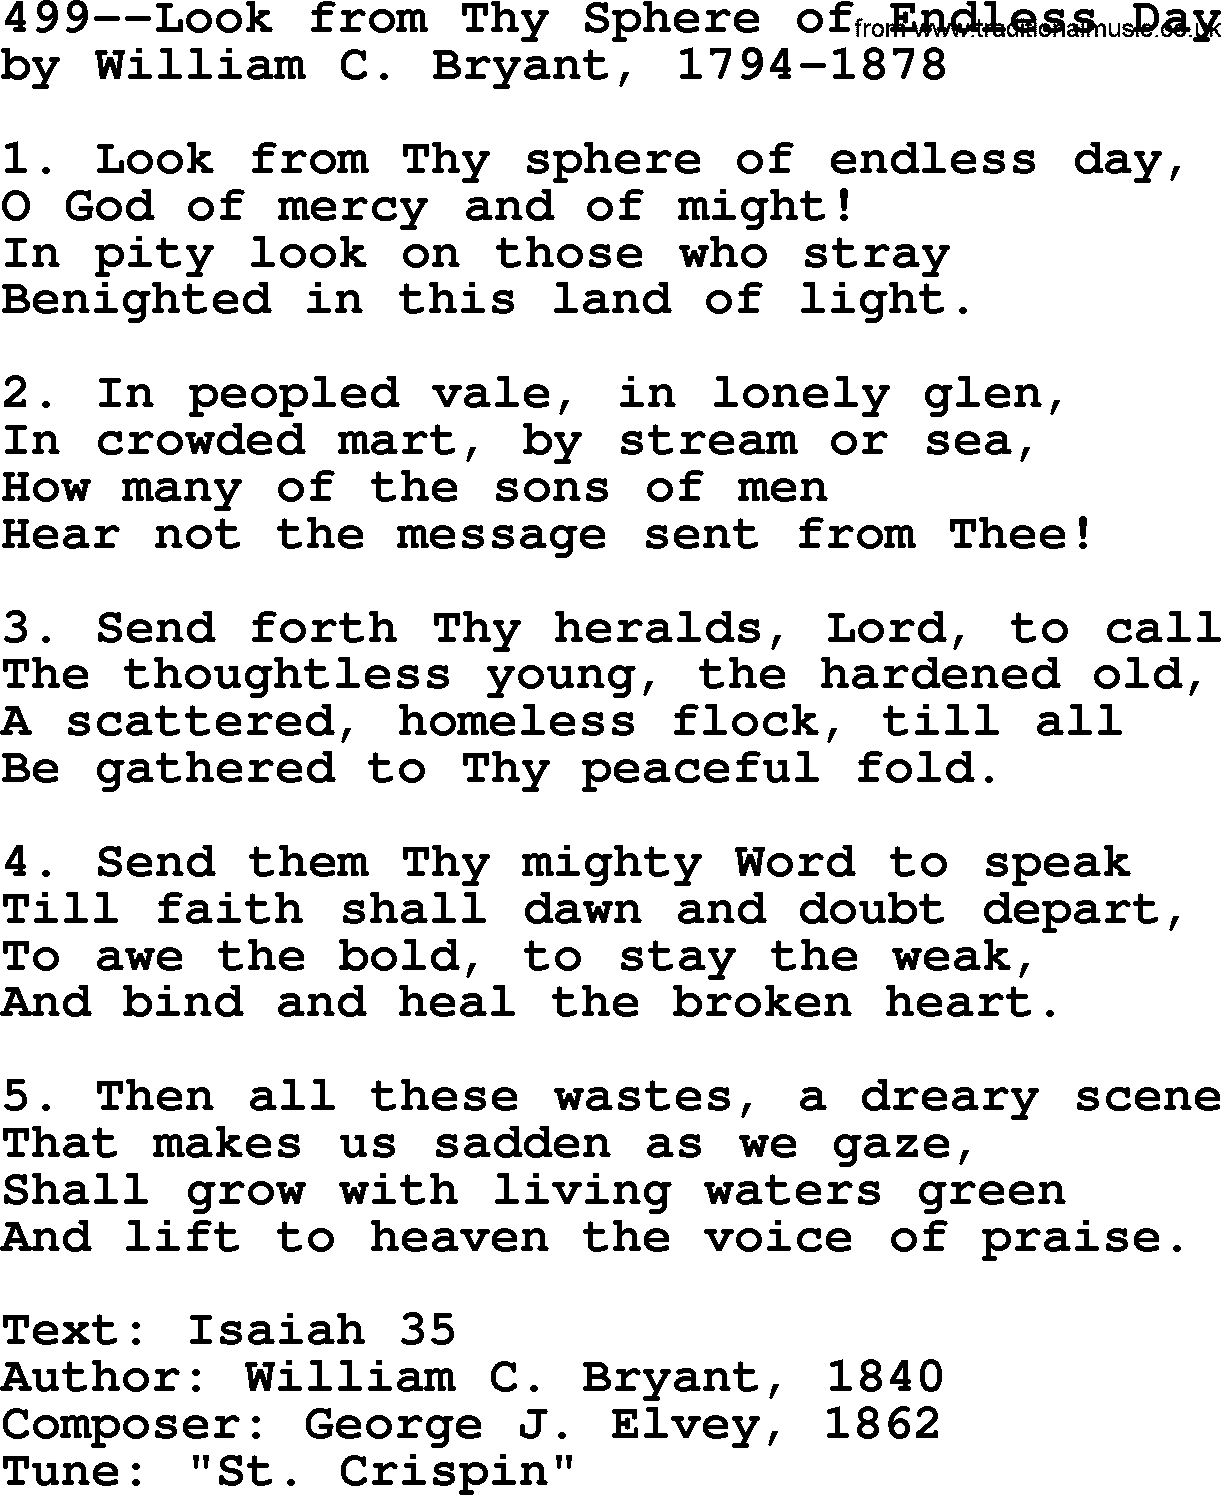 Lutheran Hymn: 499--Look from Thy Sphere of Endless Day.txt lyrics with PDF